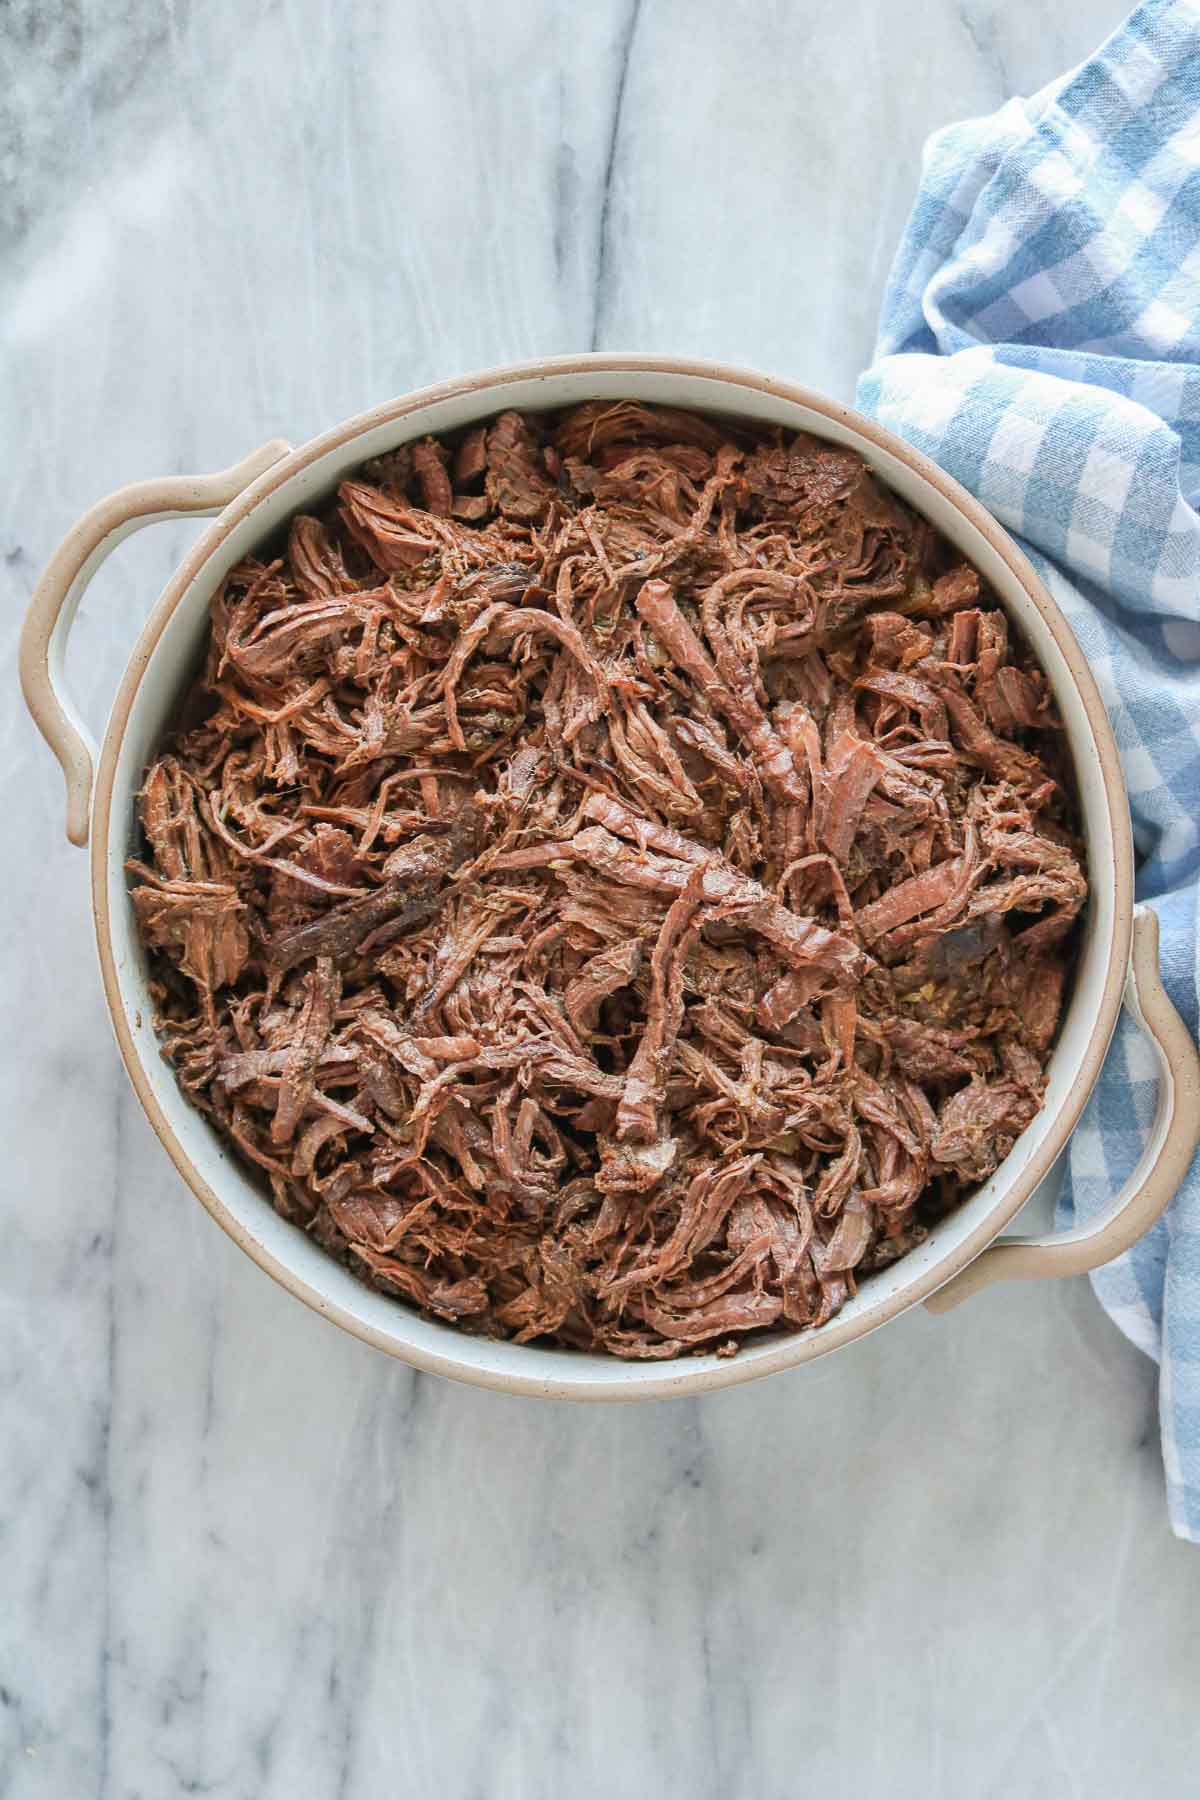 Shredded cooked moose meat in a serving dish.